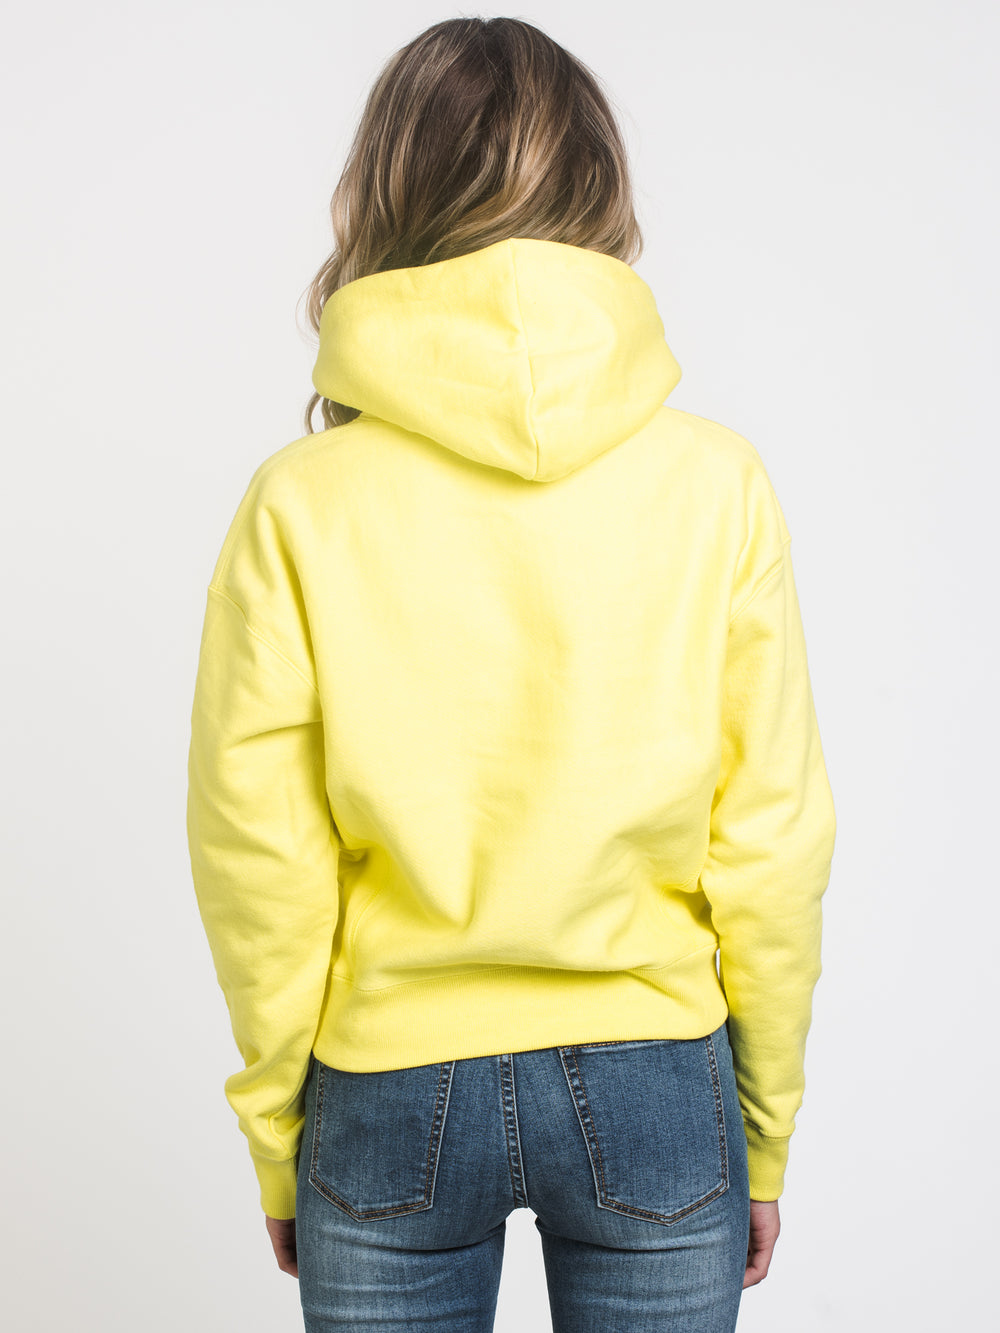 WOMENS REV WEAVE CHN PULLOVER HOODIE - YELLOW - CLEARANCE